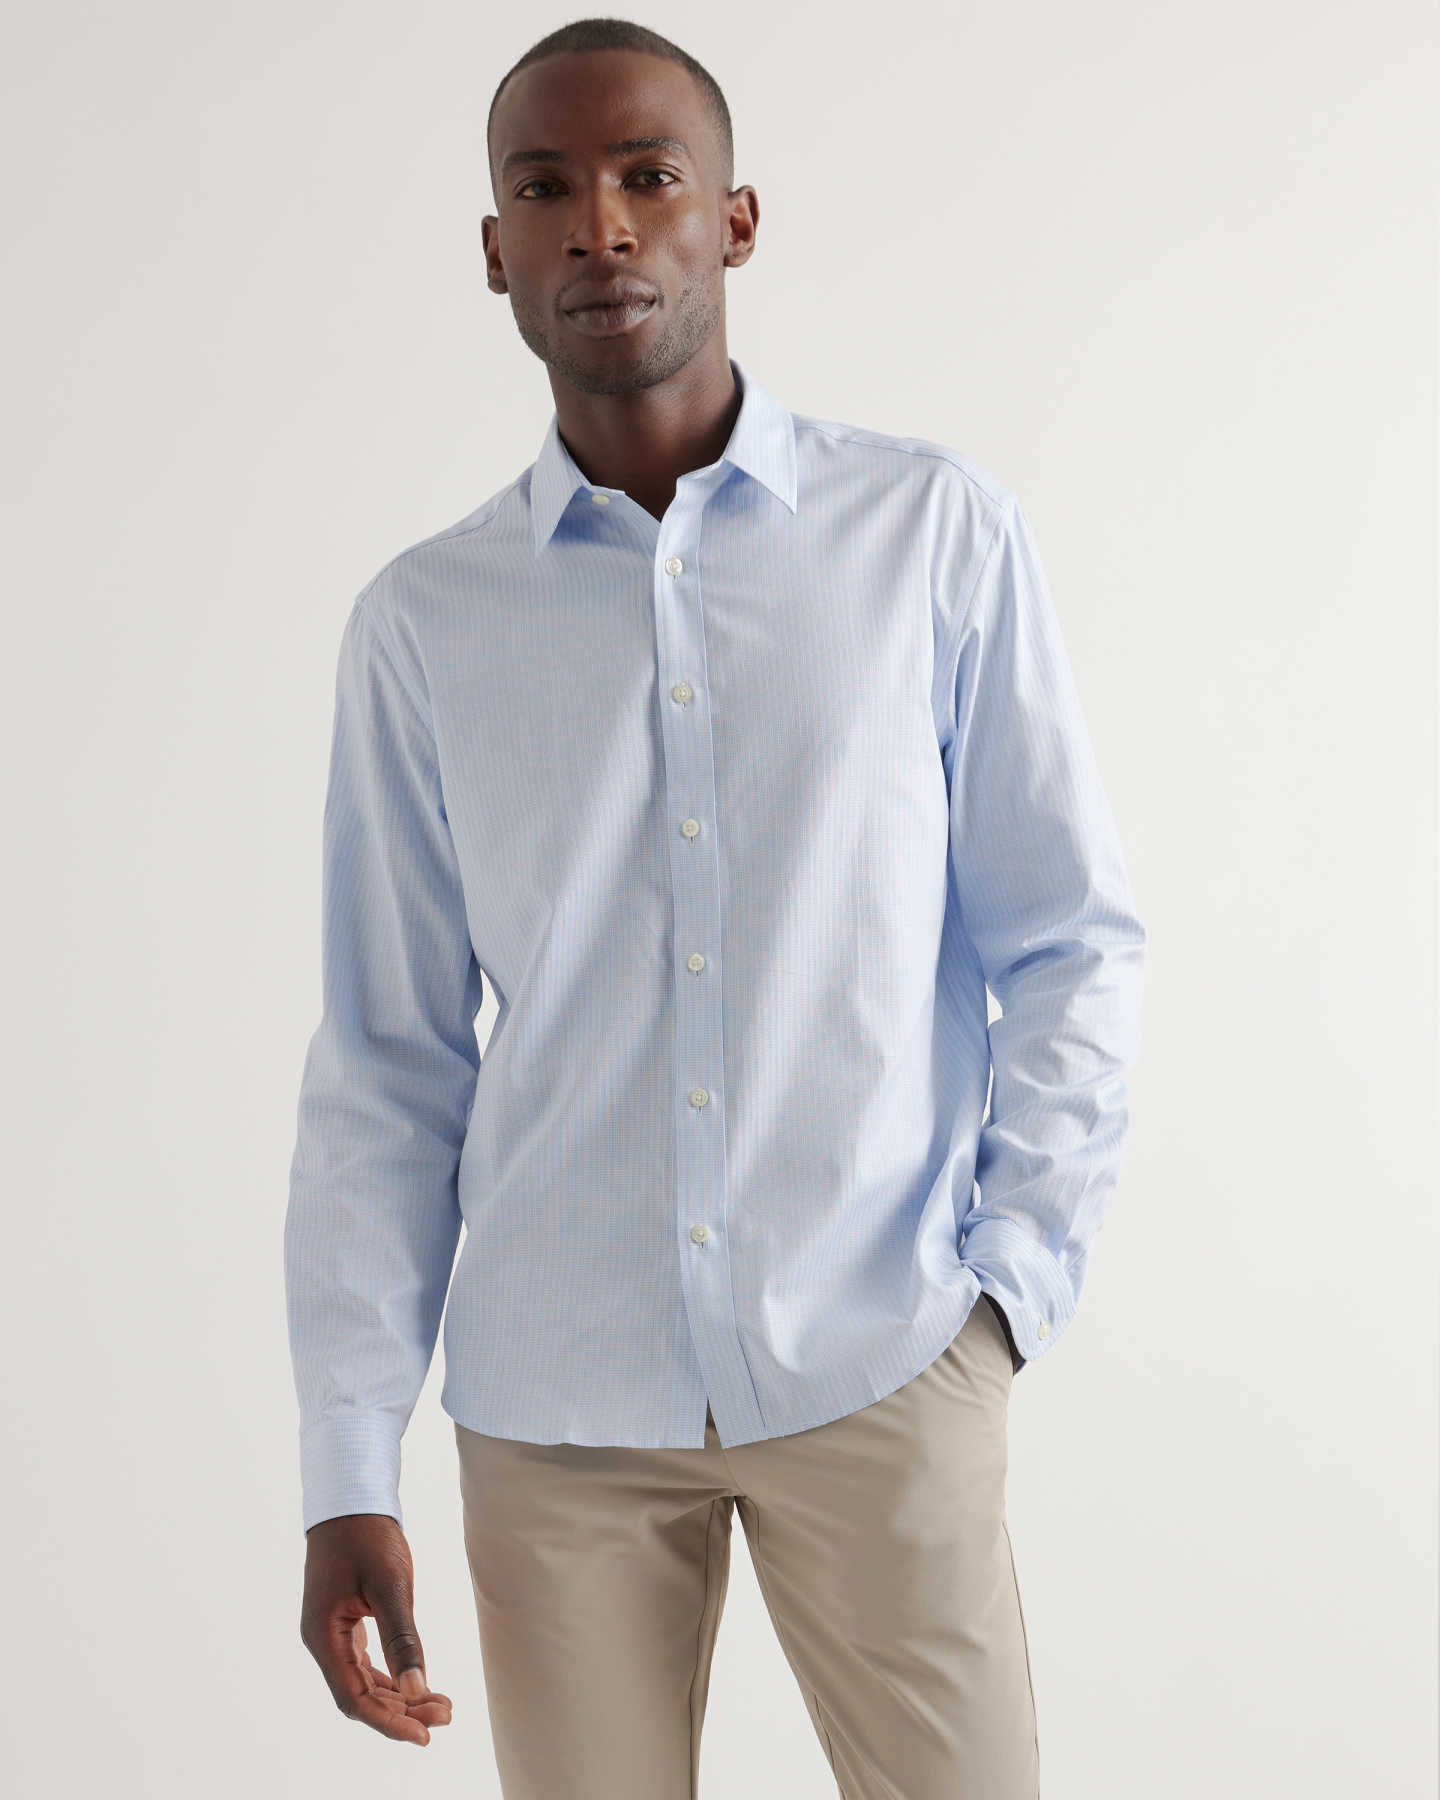 The Untucked Dress Shirt - Blue Patterned Stripes